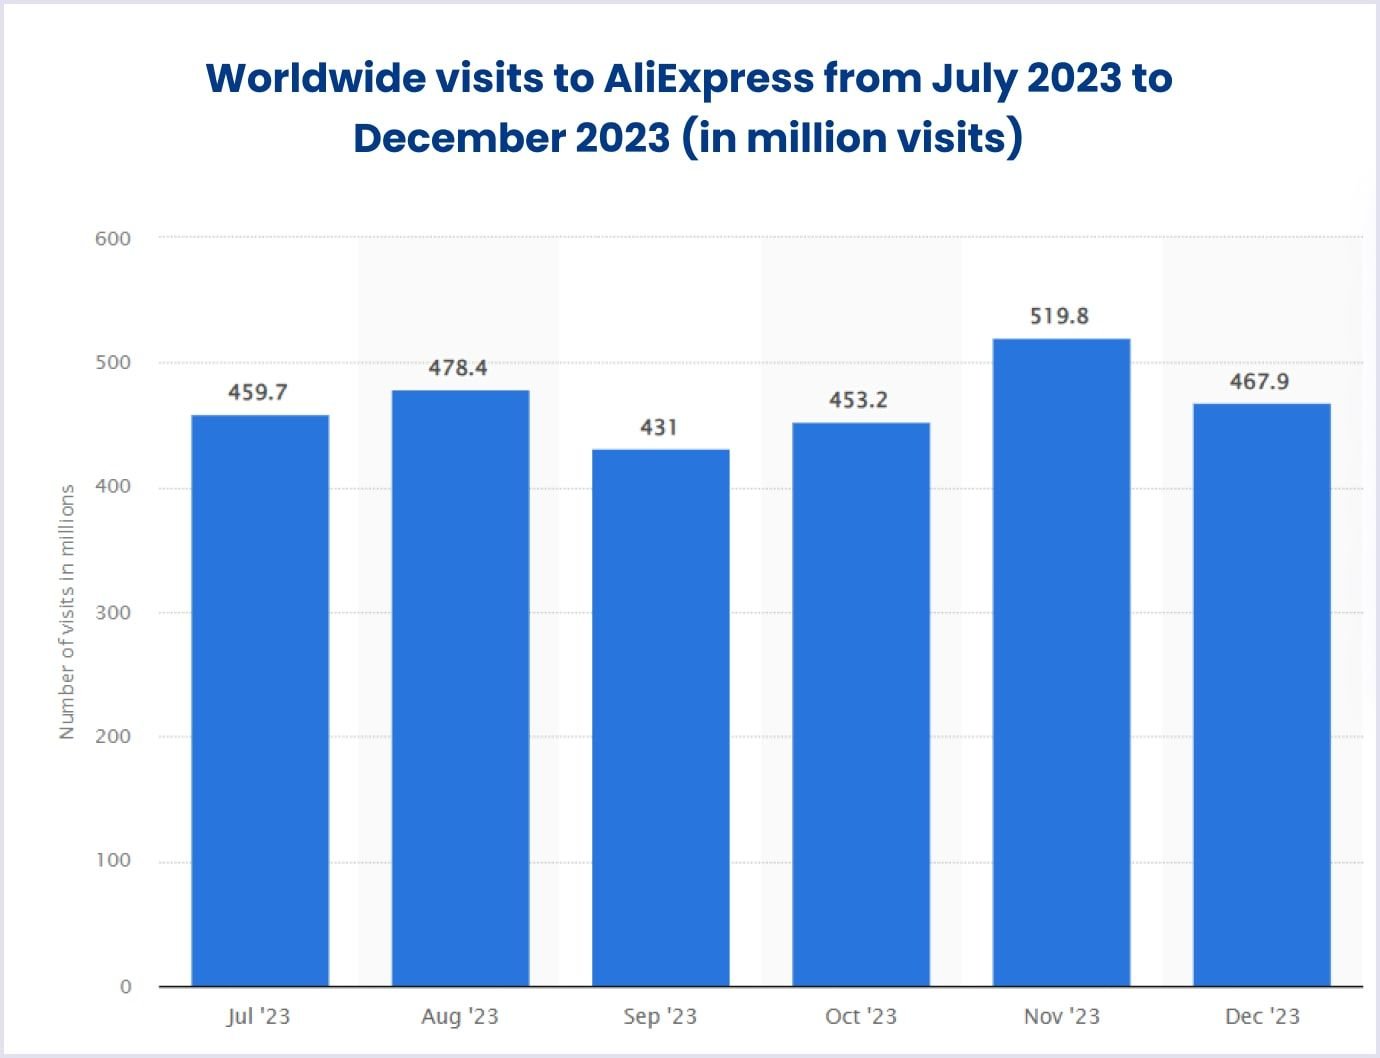 Worldwide visits to AliExpress from November 2022 and April 2023